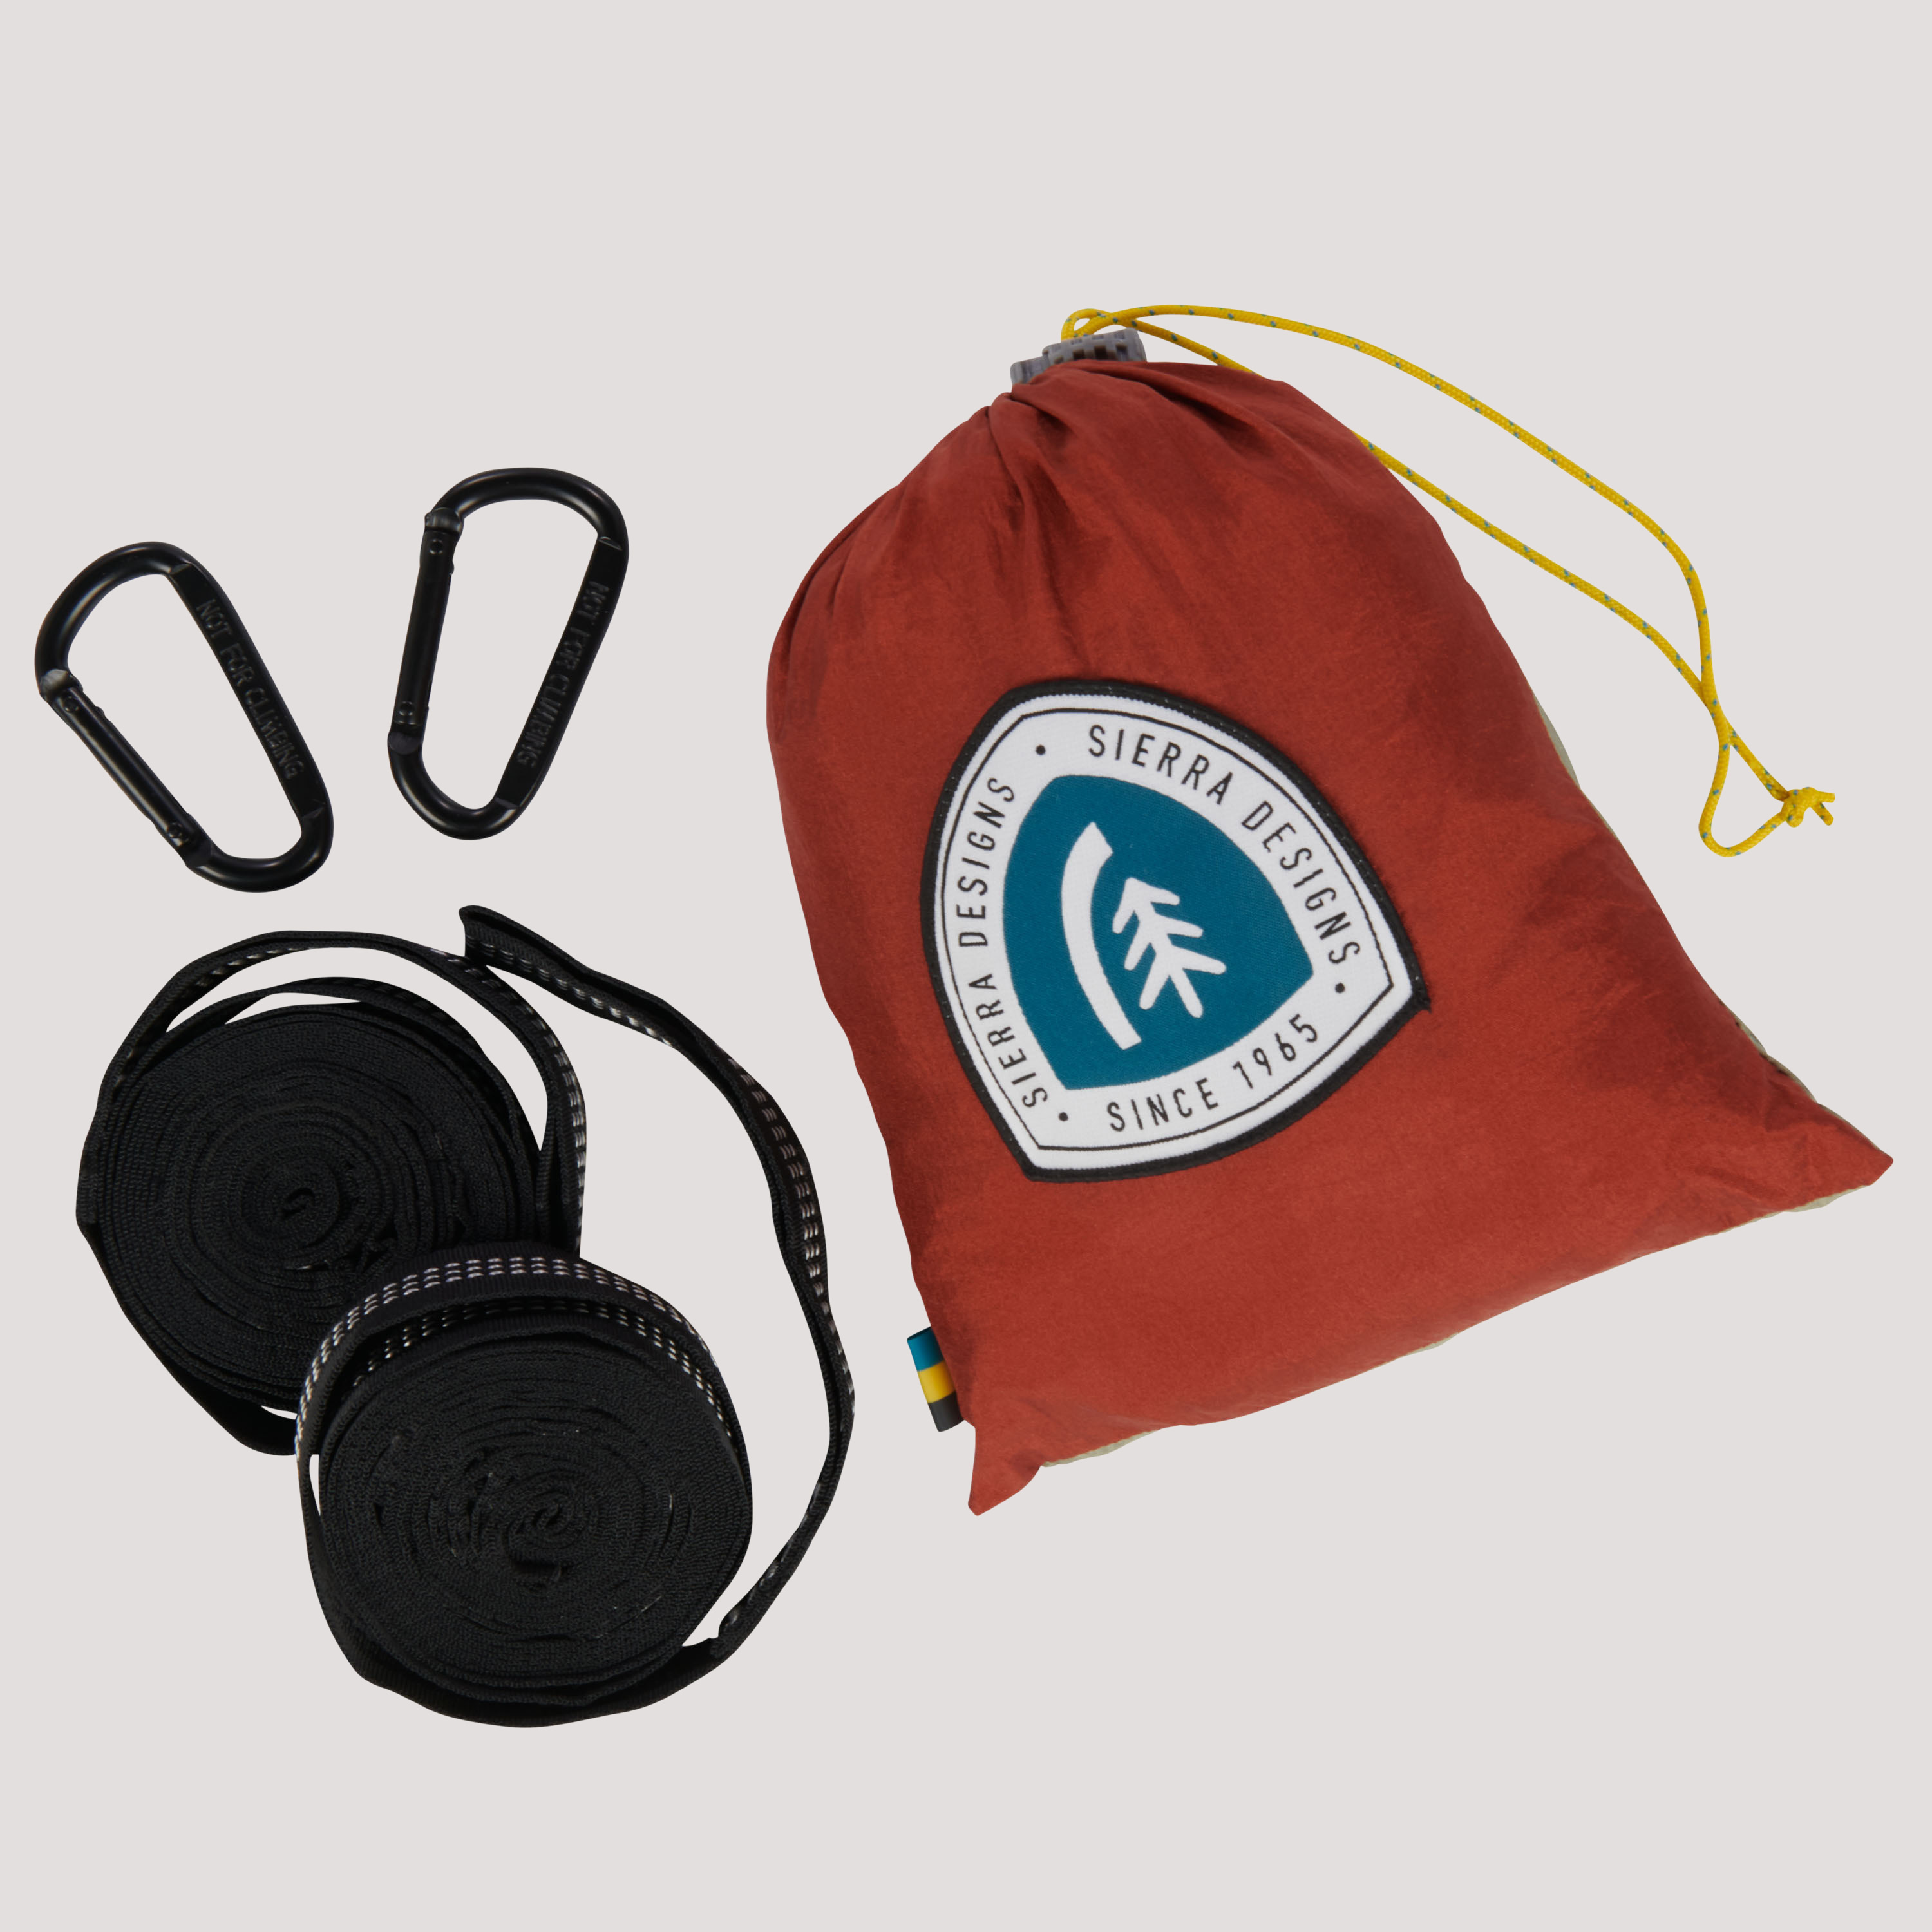 Sierra Designs Double Lightweight Hammock, shown packed in storage bag, with accessories next to it